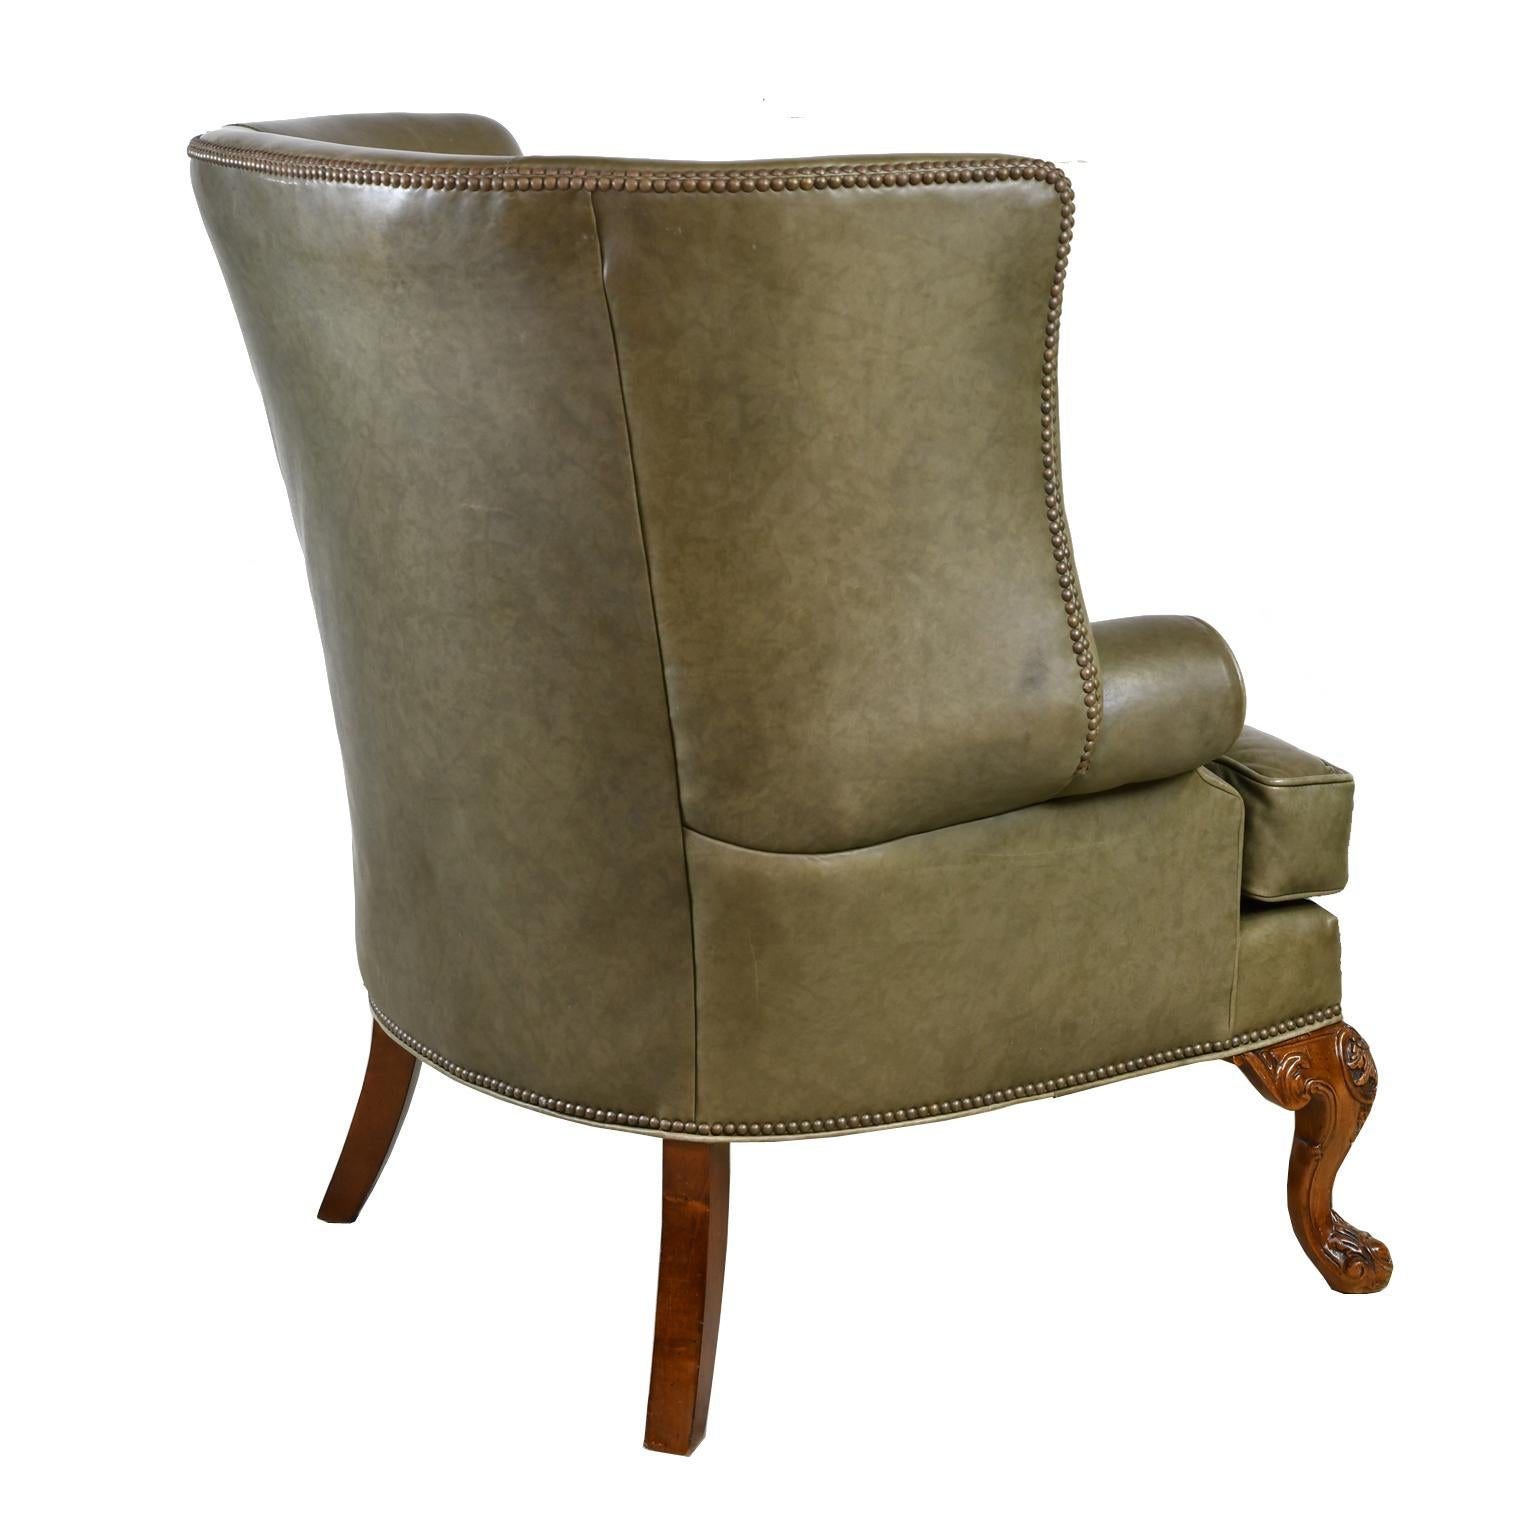 American Large Vintage Wingback Armchair with Sage-Green Leather Upholstery